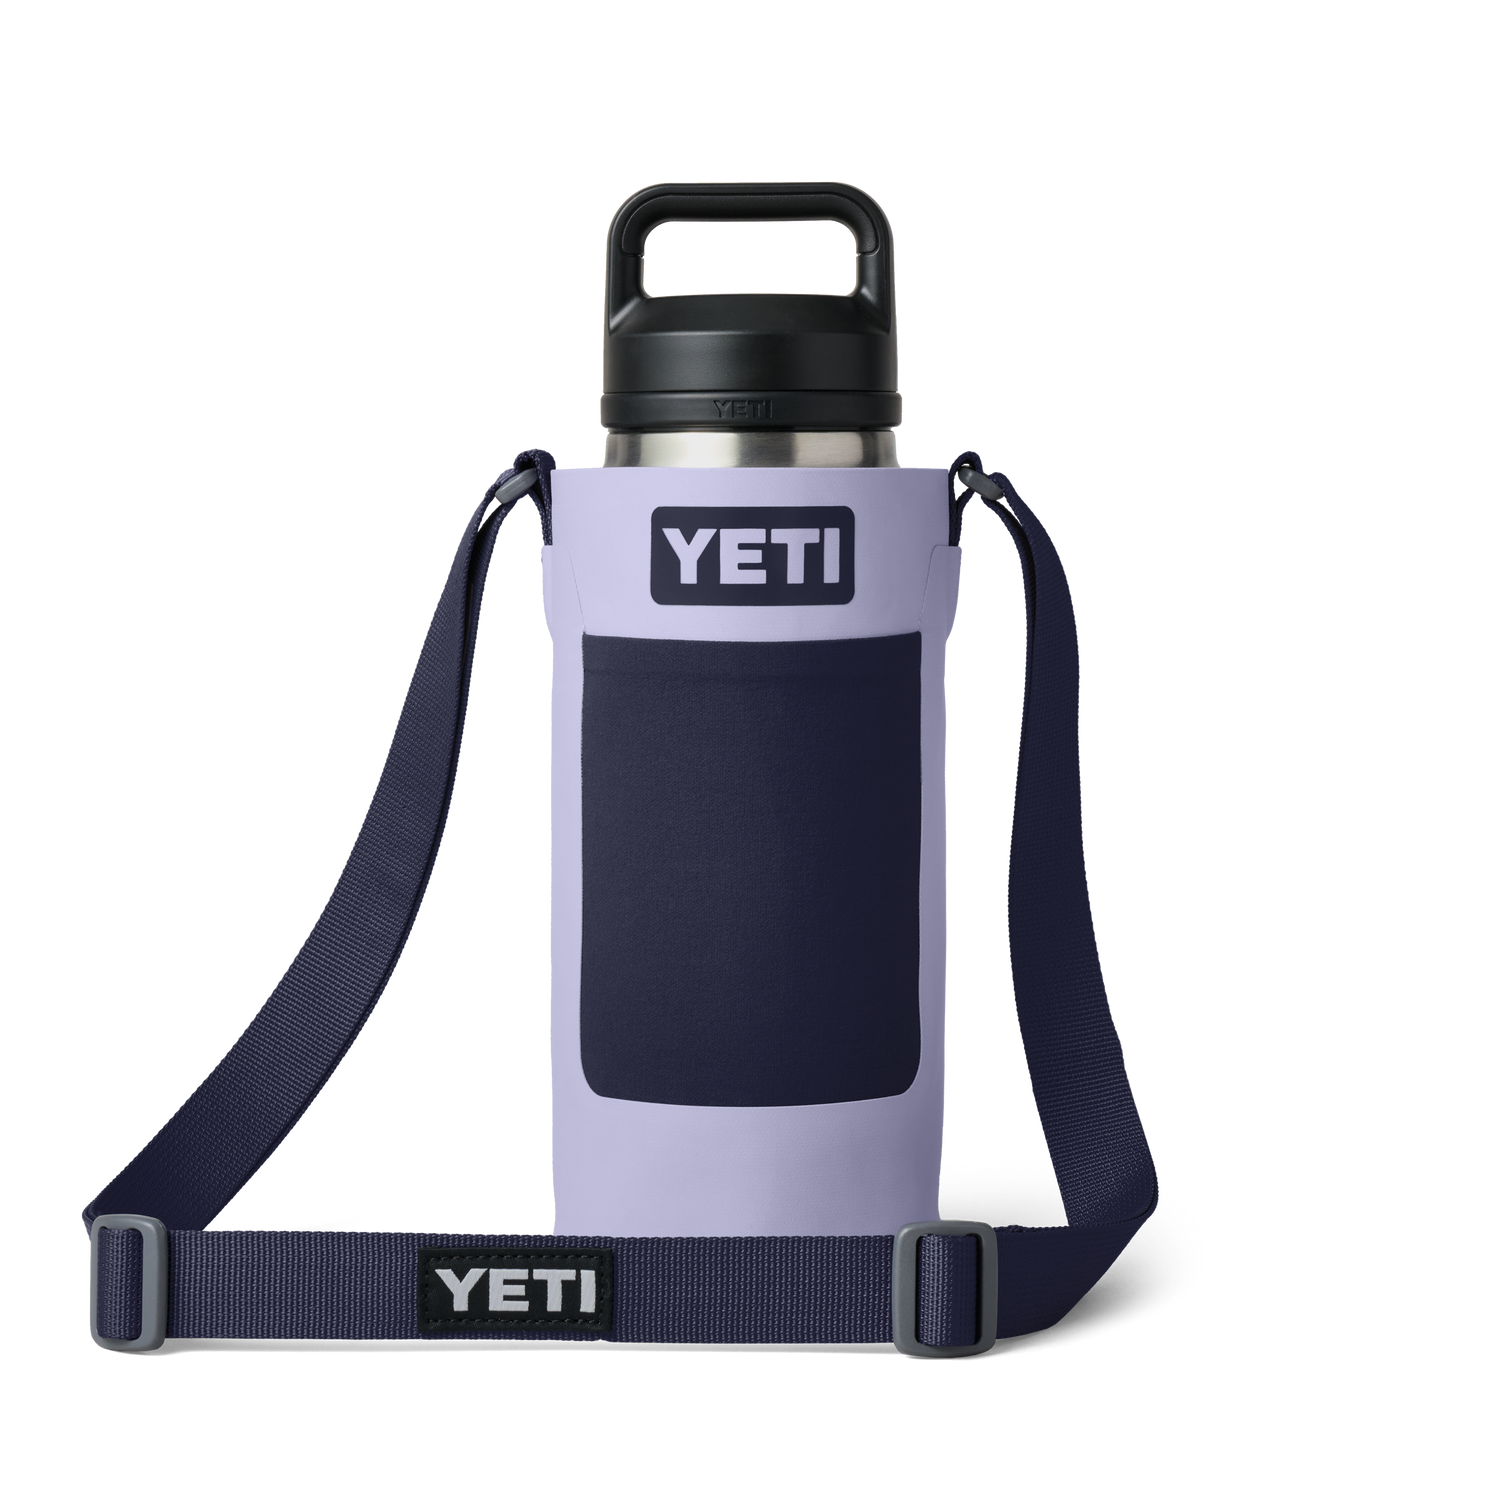 Emerging Gear: Better YETI Cooler, EDC Sling, and More